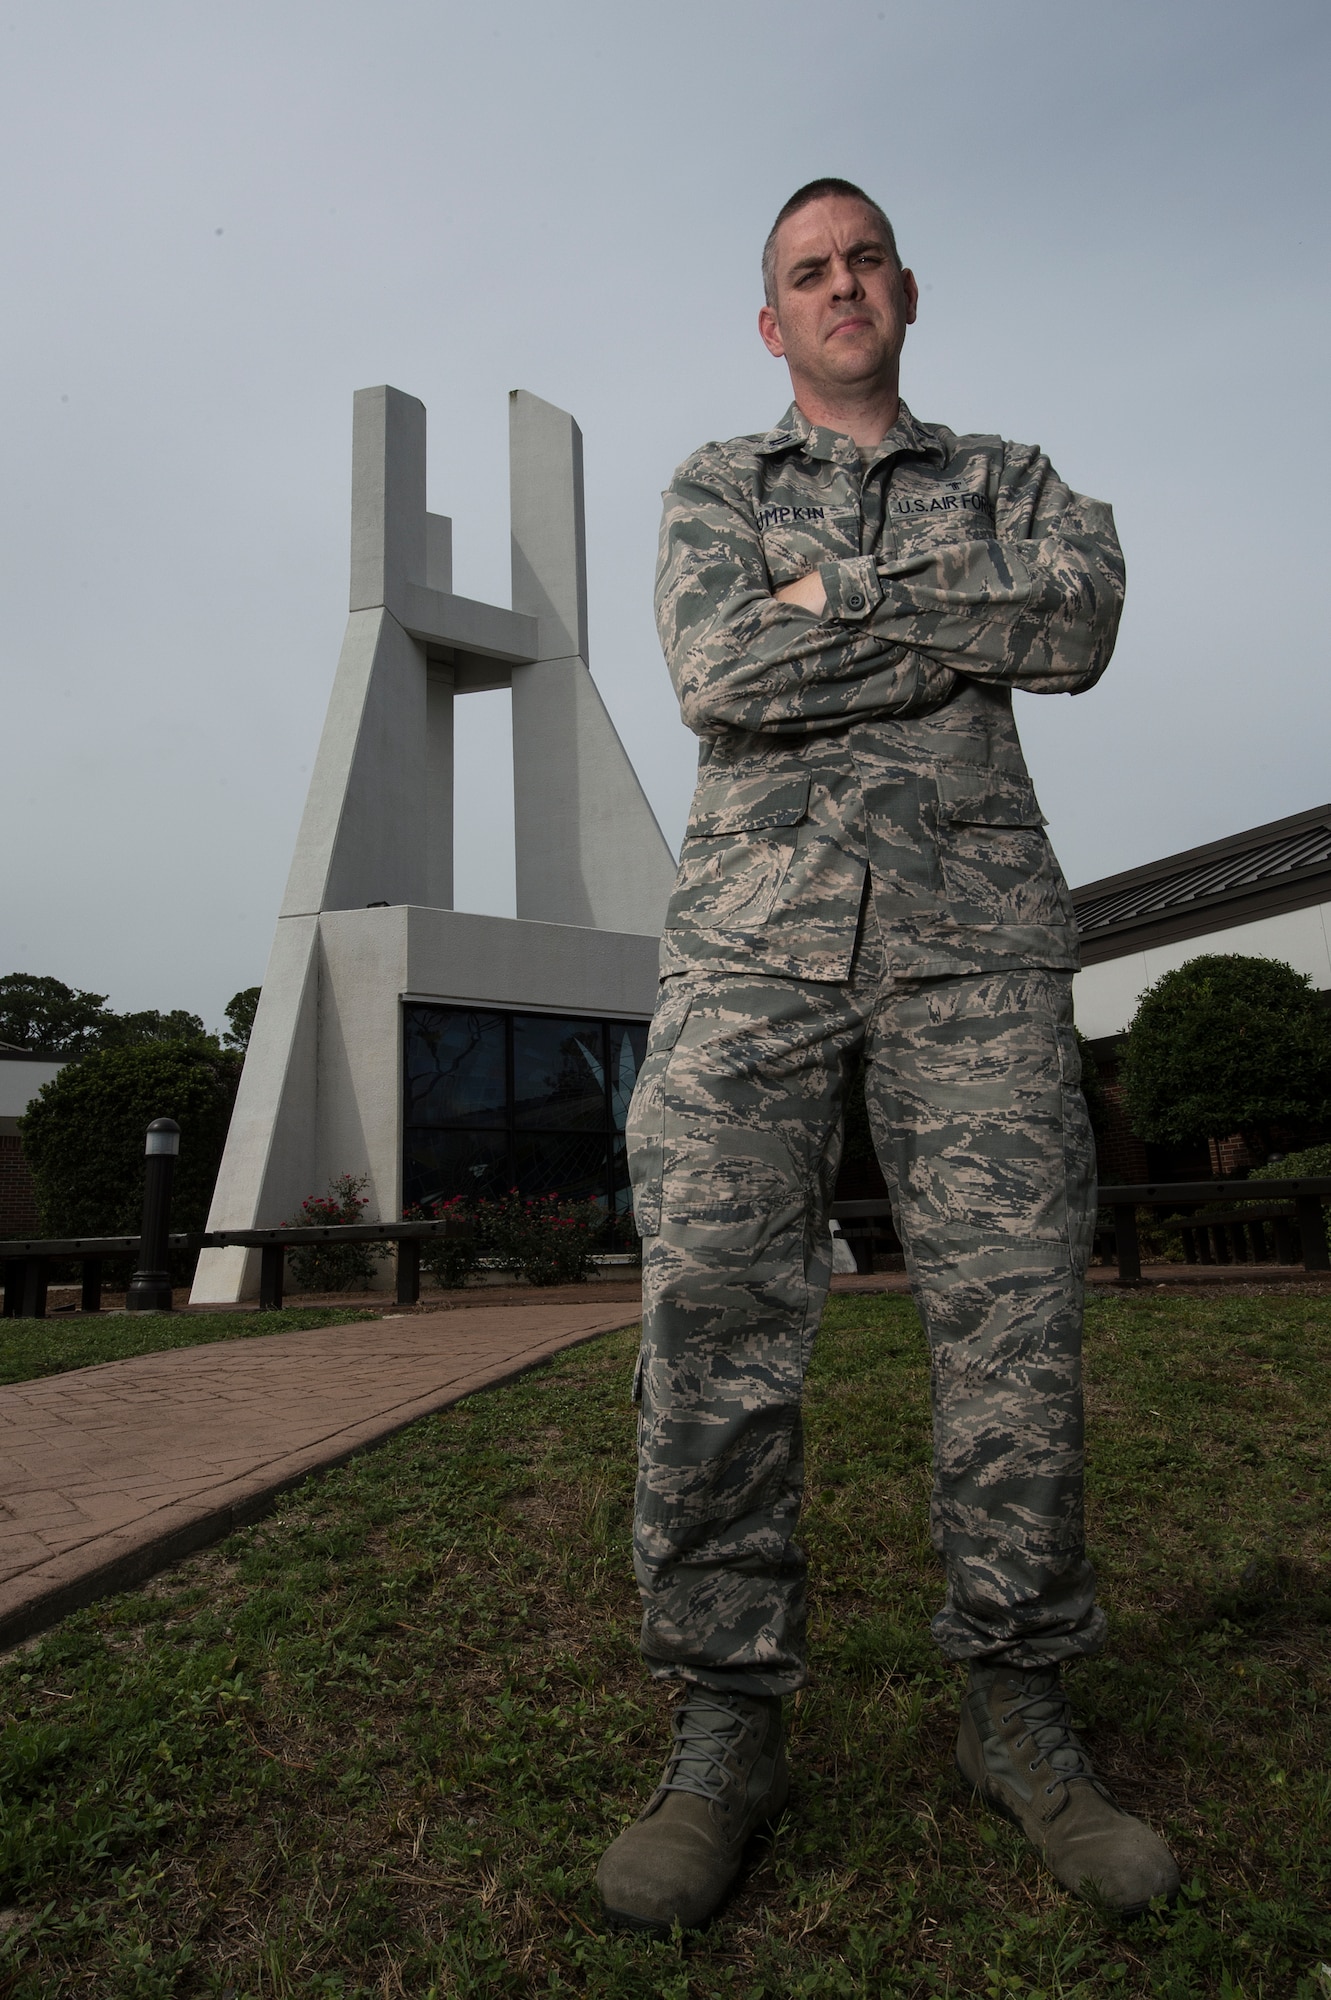 Chaplain (Capt.) Doug Lumpkin, 1st Special Operations Wing, poses for a photo at Hurlburt Field, Fla., July 18, 2014. Lumpkin is the chaplain for the 1st Special Operations Maintenance Group and is responsible for advising leadership, conducting worship services, and caring for Airmen and their families. (U.S. Air Force photo/Airman 1st Class Jeff Parkinson)